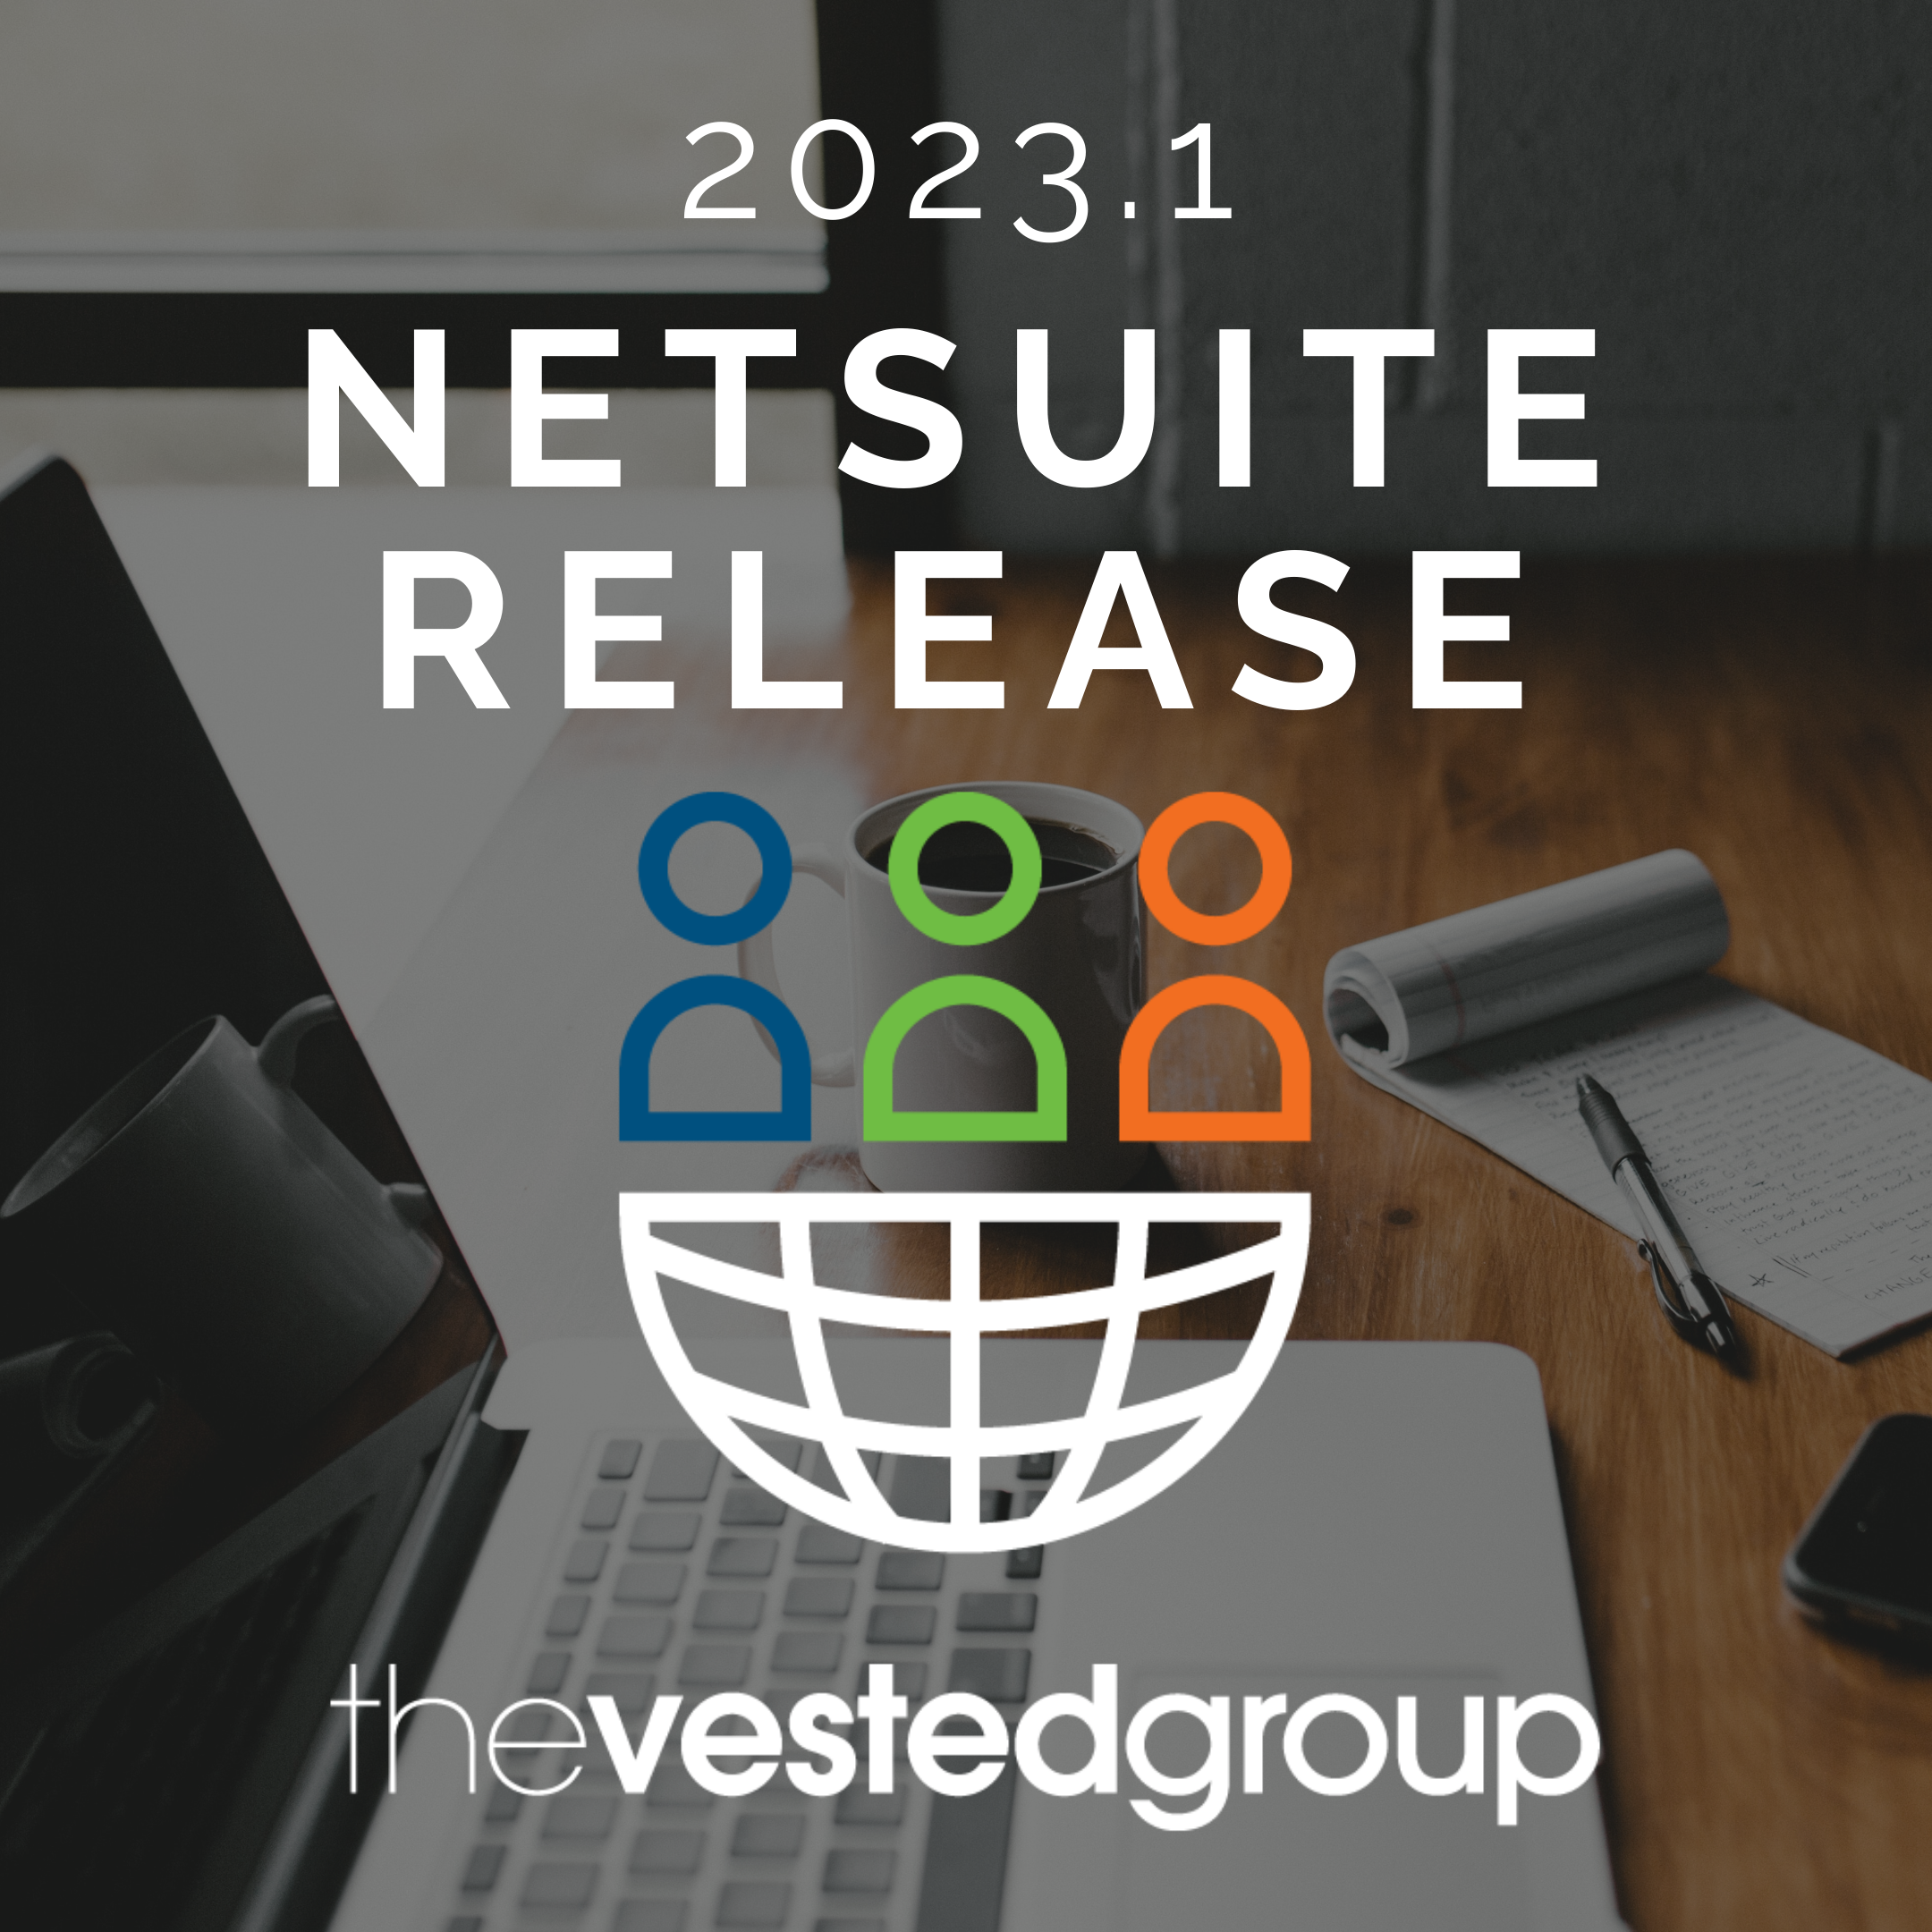 Are you ready for the NetSuite 2023.1 Release?